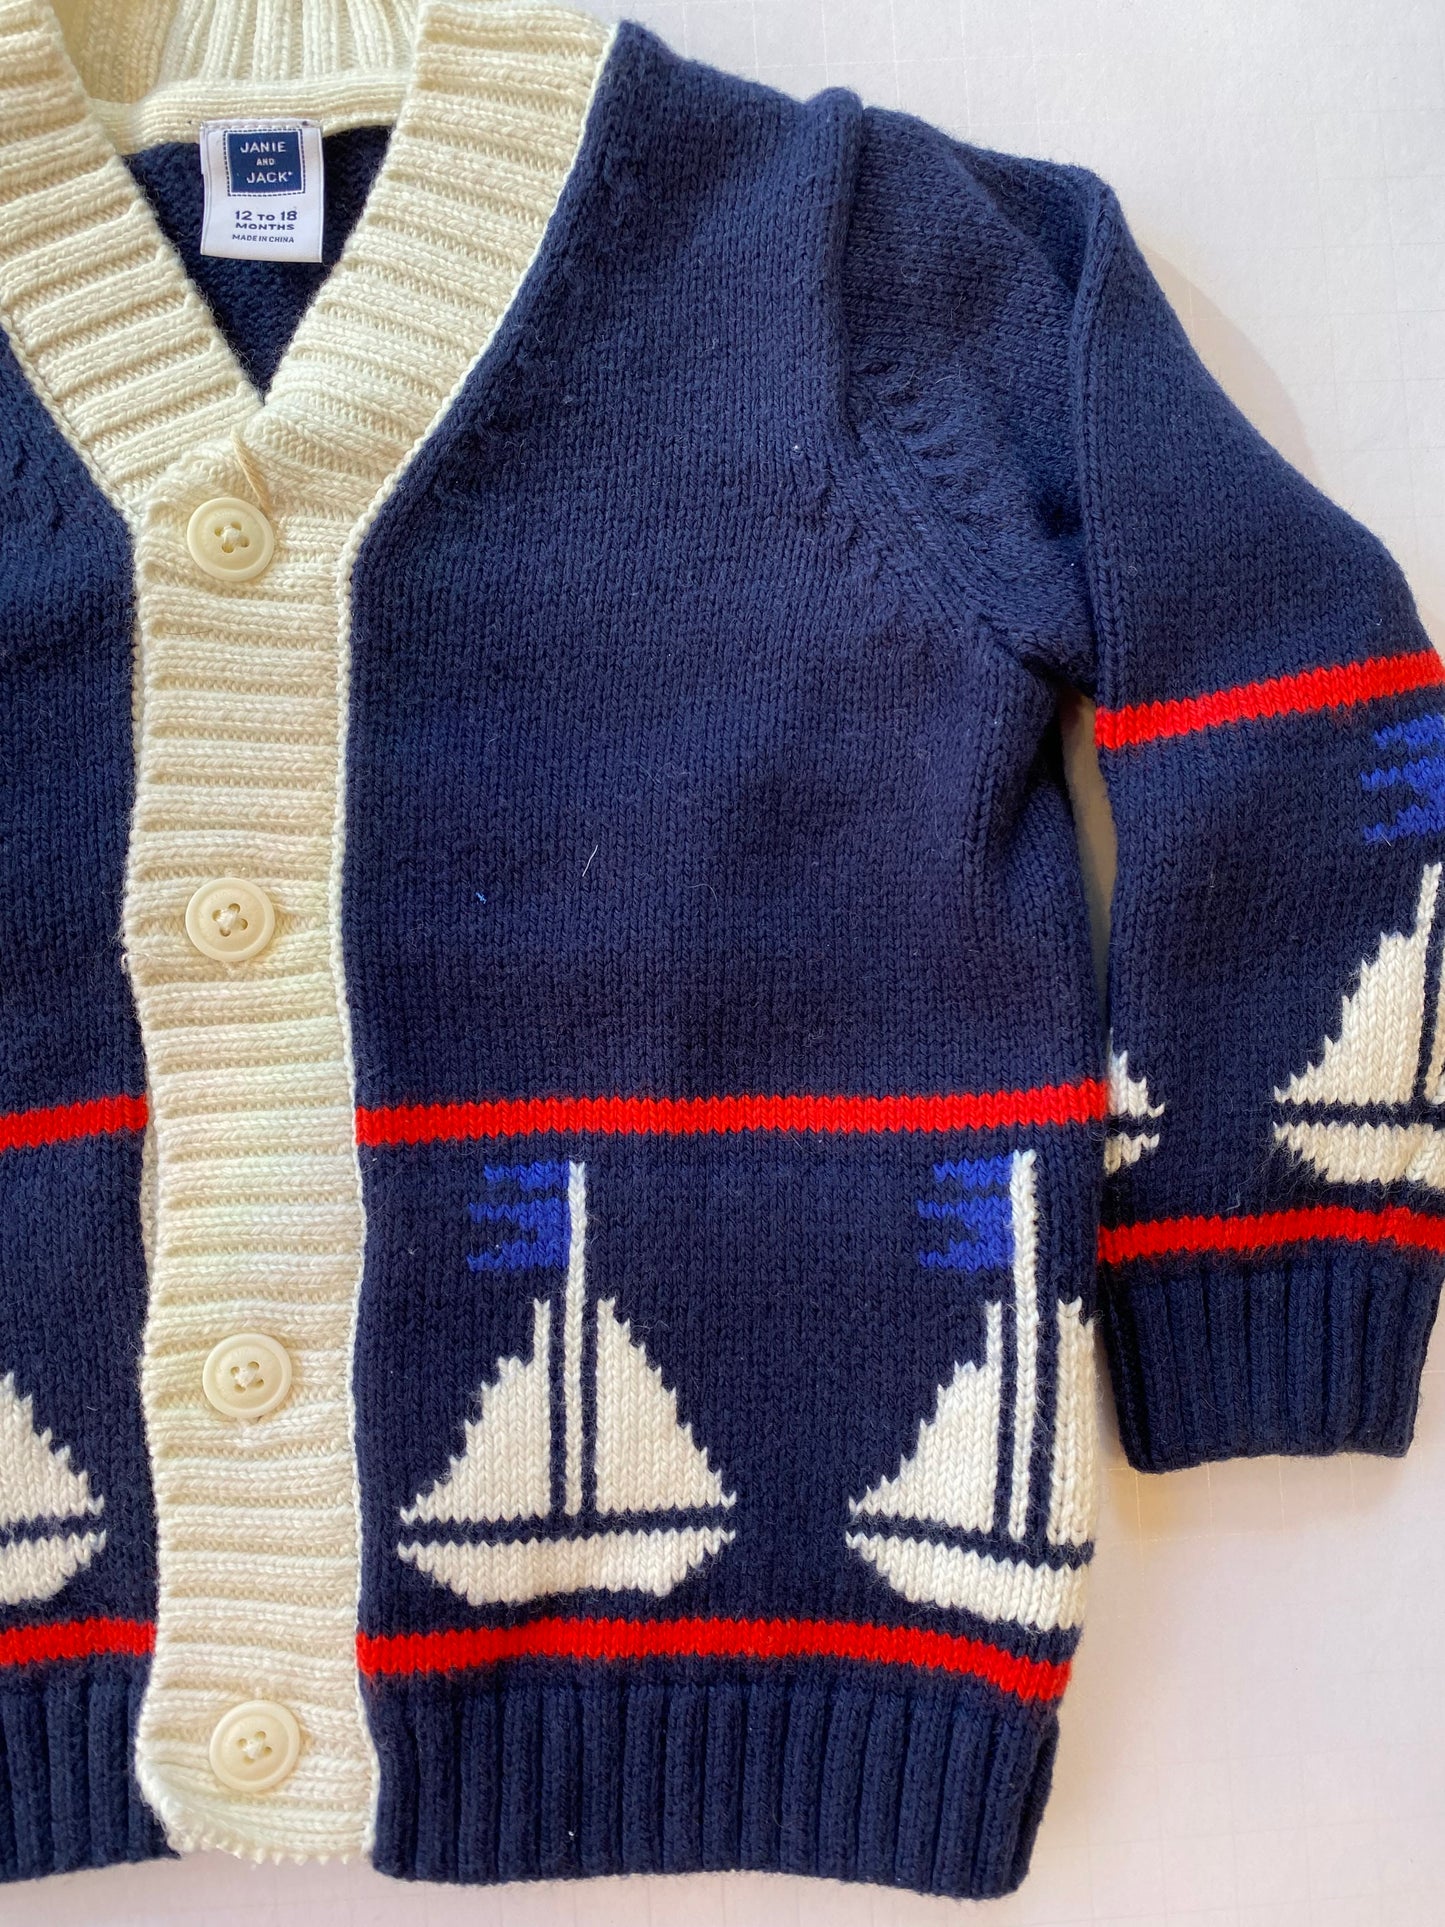 JANIE AND JACK Knit navy blue Buttoned Cardigan LS / 12-18M